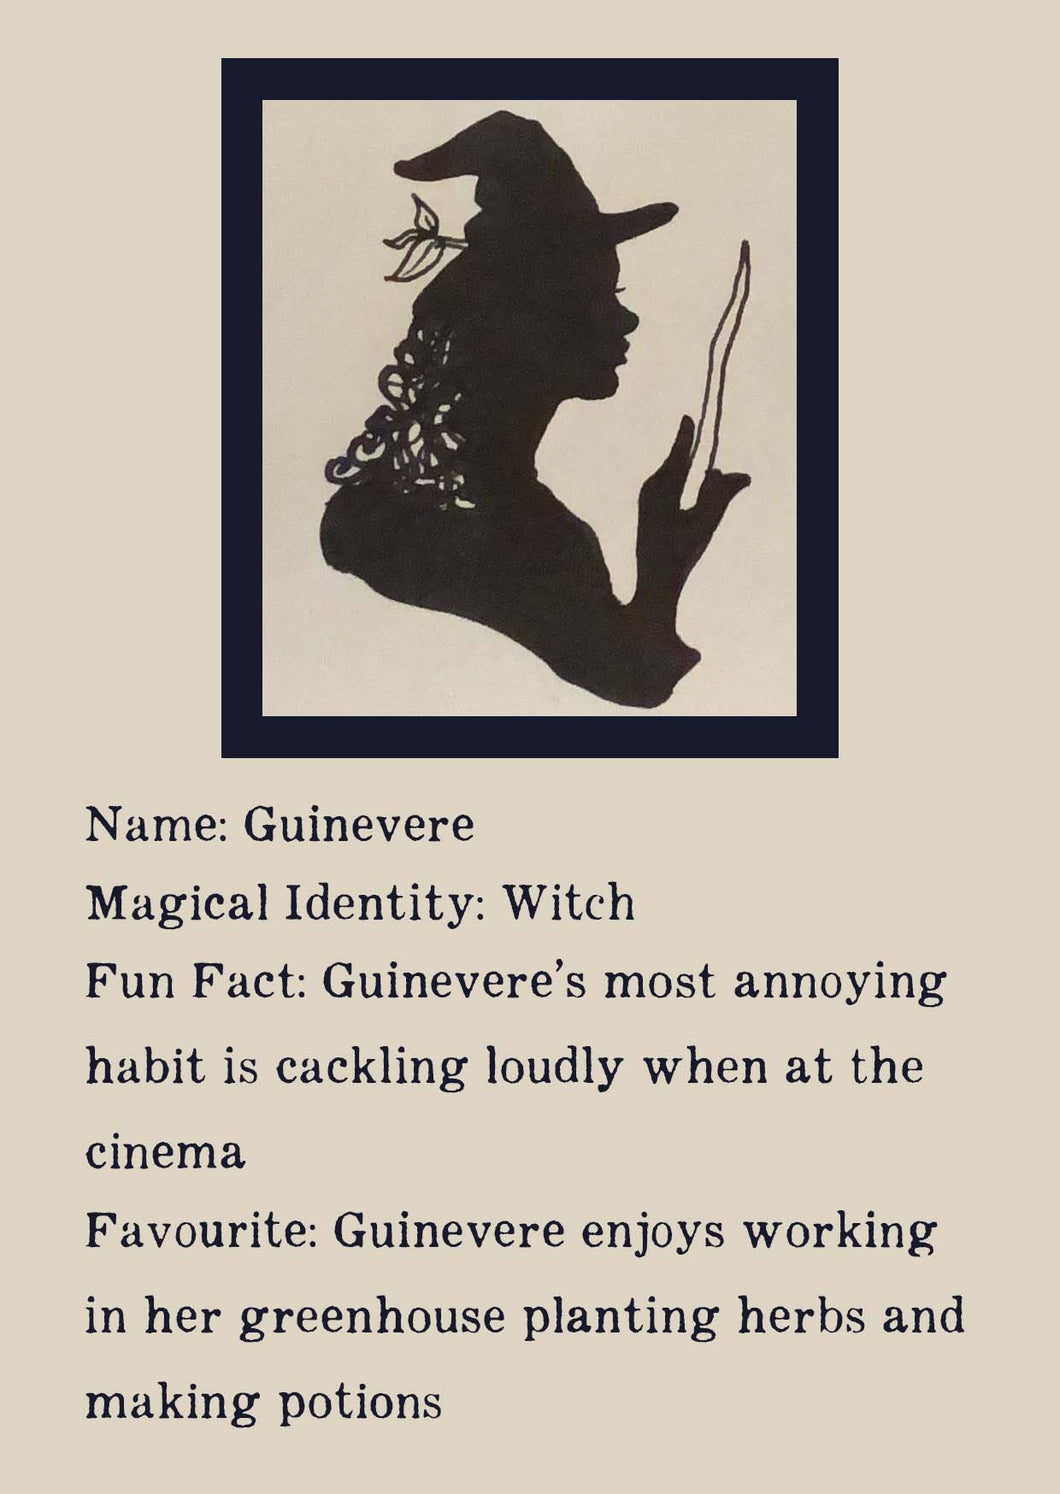 Character bio for Guinevere the Witch. Image shows the silhouette of a witch holding up a wand with a leaf growing on her hat. Bio reads as follows - Magical Identity: Witch. Fun Fact: Guinevere's most annoying habit is cackling loudly when at the cinema. Favourite: Guinevere enjoys working in her greenhouse planting herbs and making potions. 